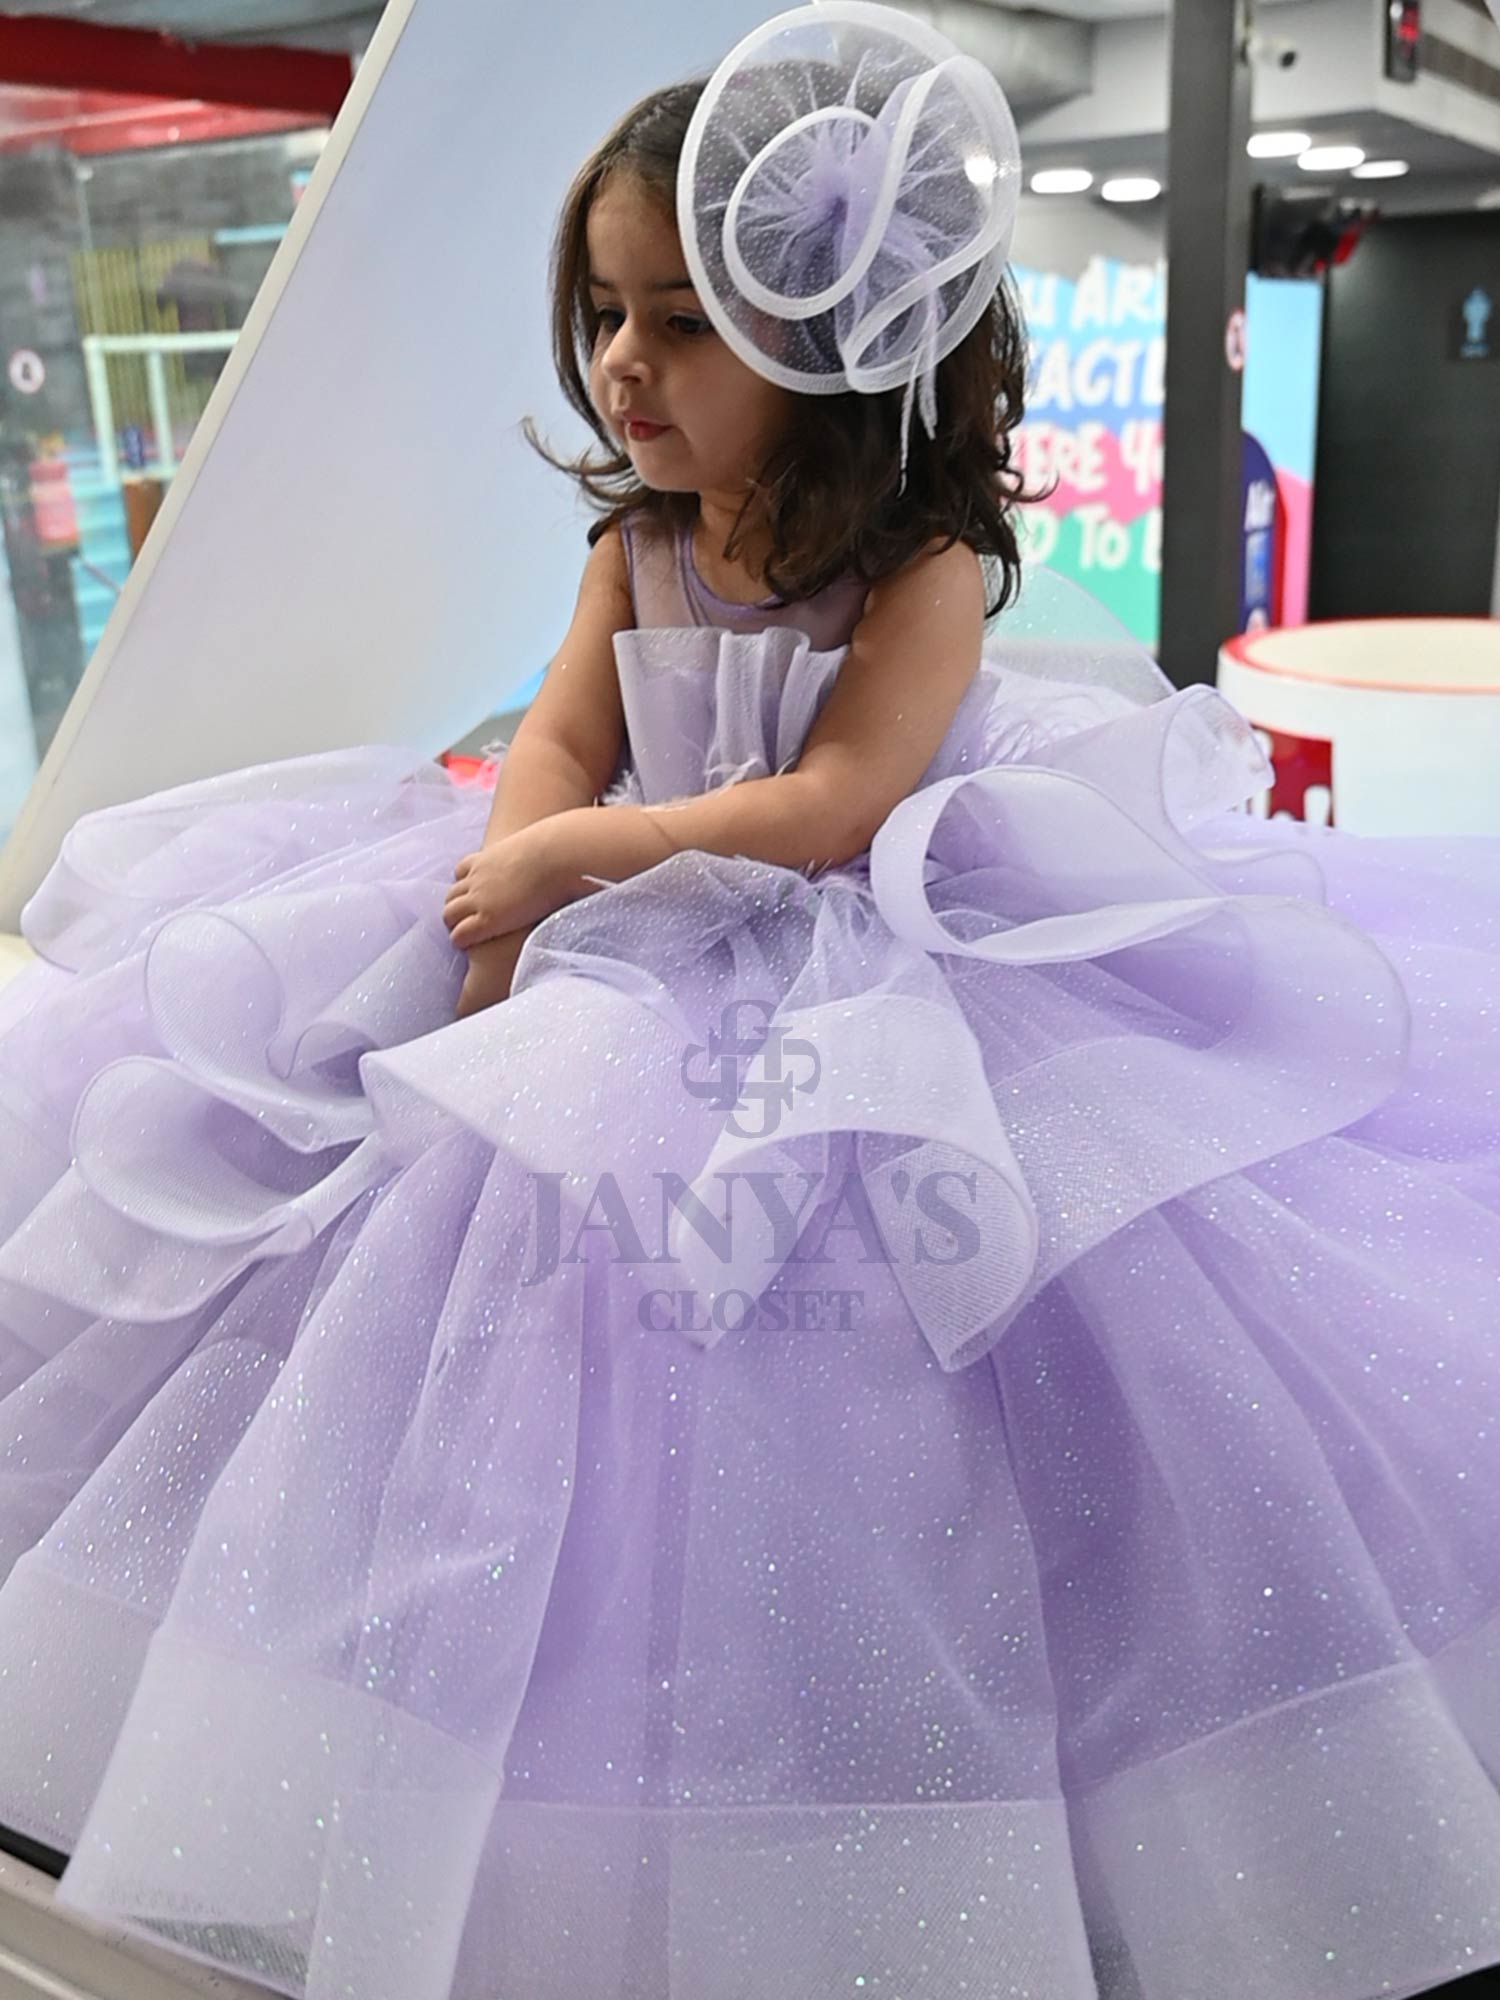 Janyas Closet Dazzling Dream Lilac Gown With Hair Pin